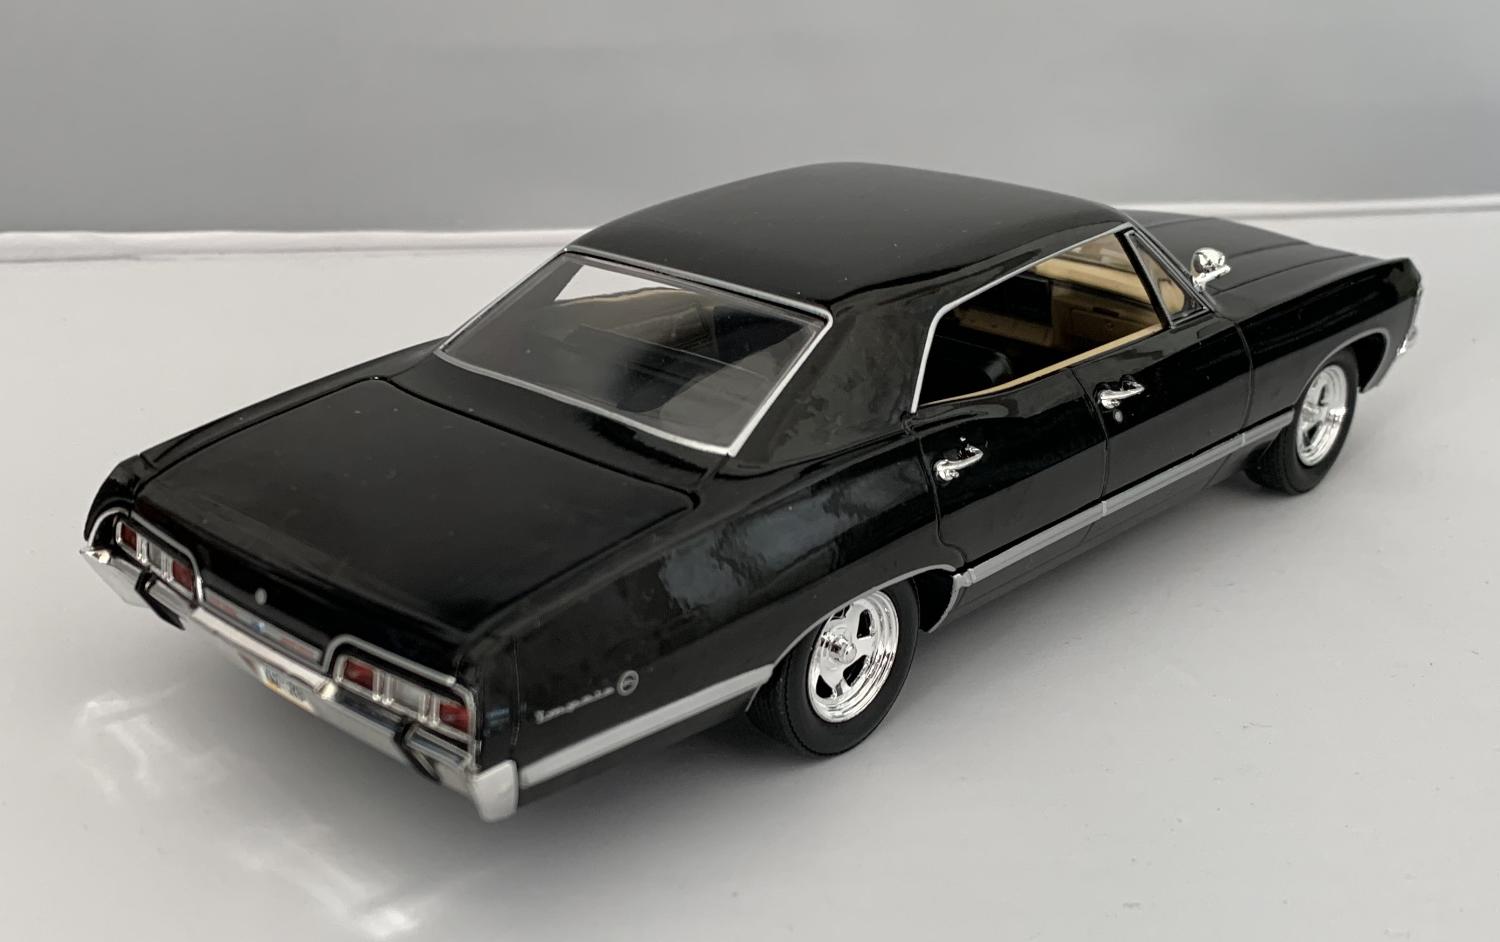 An excellent scale model of a Chevrolet Impala Sport Sedan decorated in black with chrome wheel